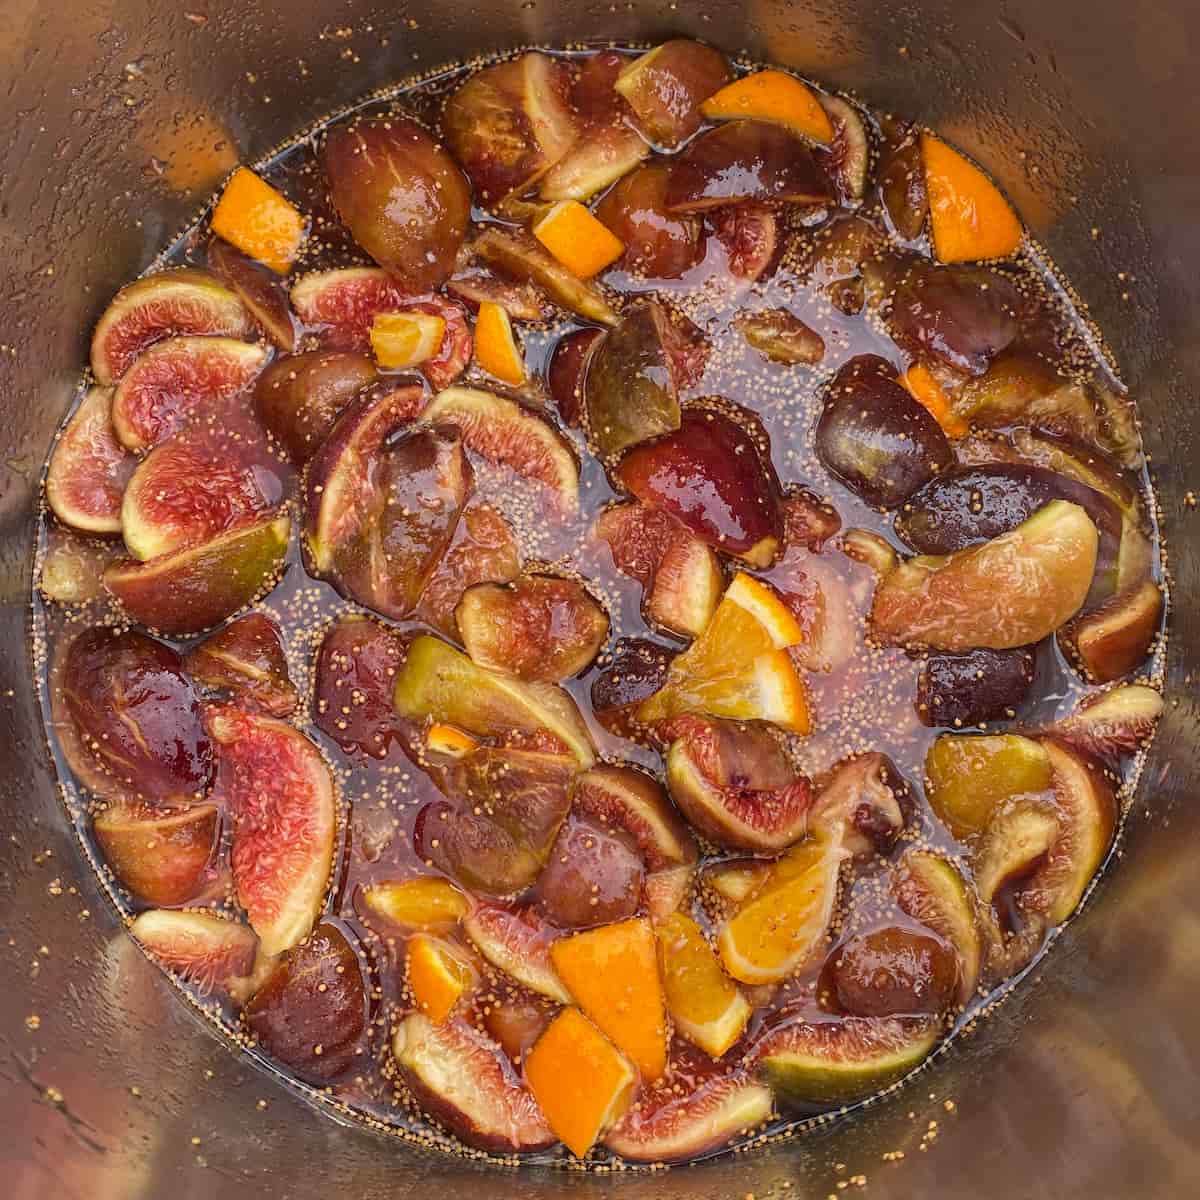 chopped figs and oranges macerating in sugar